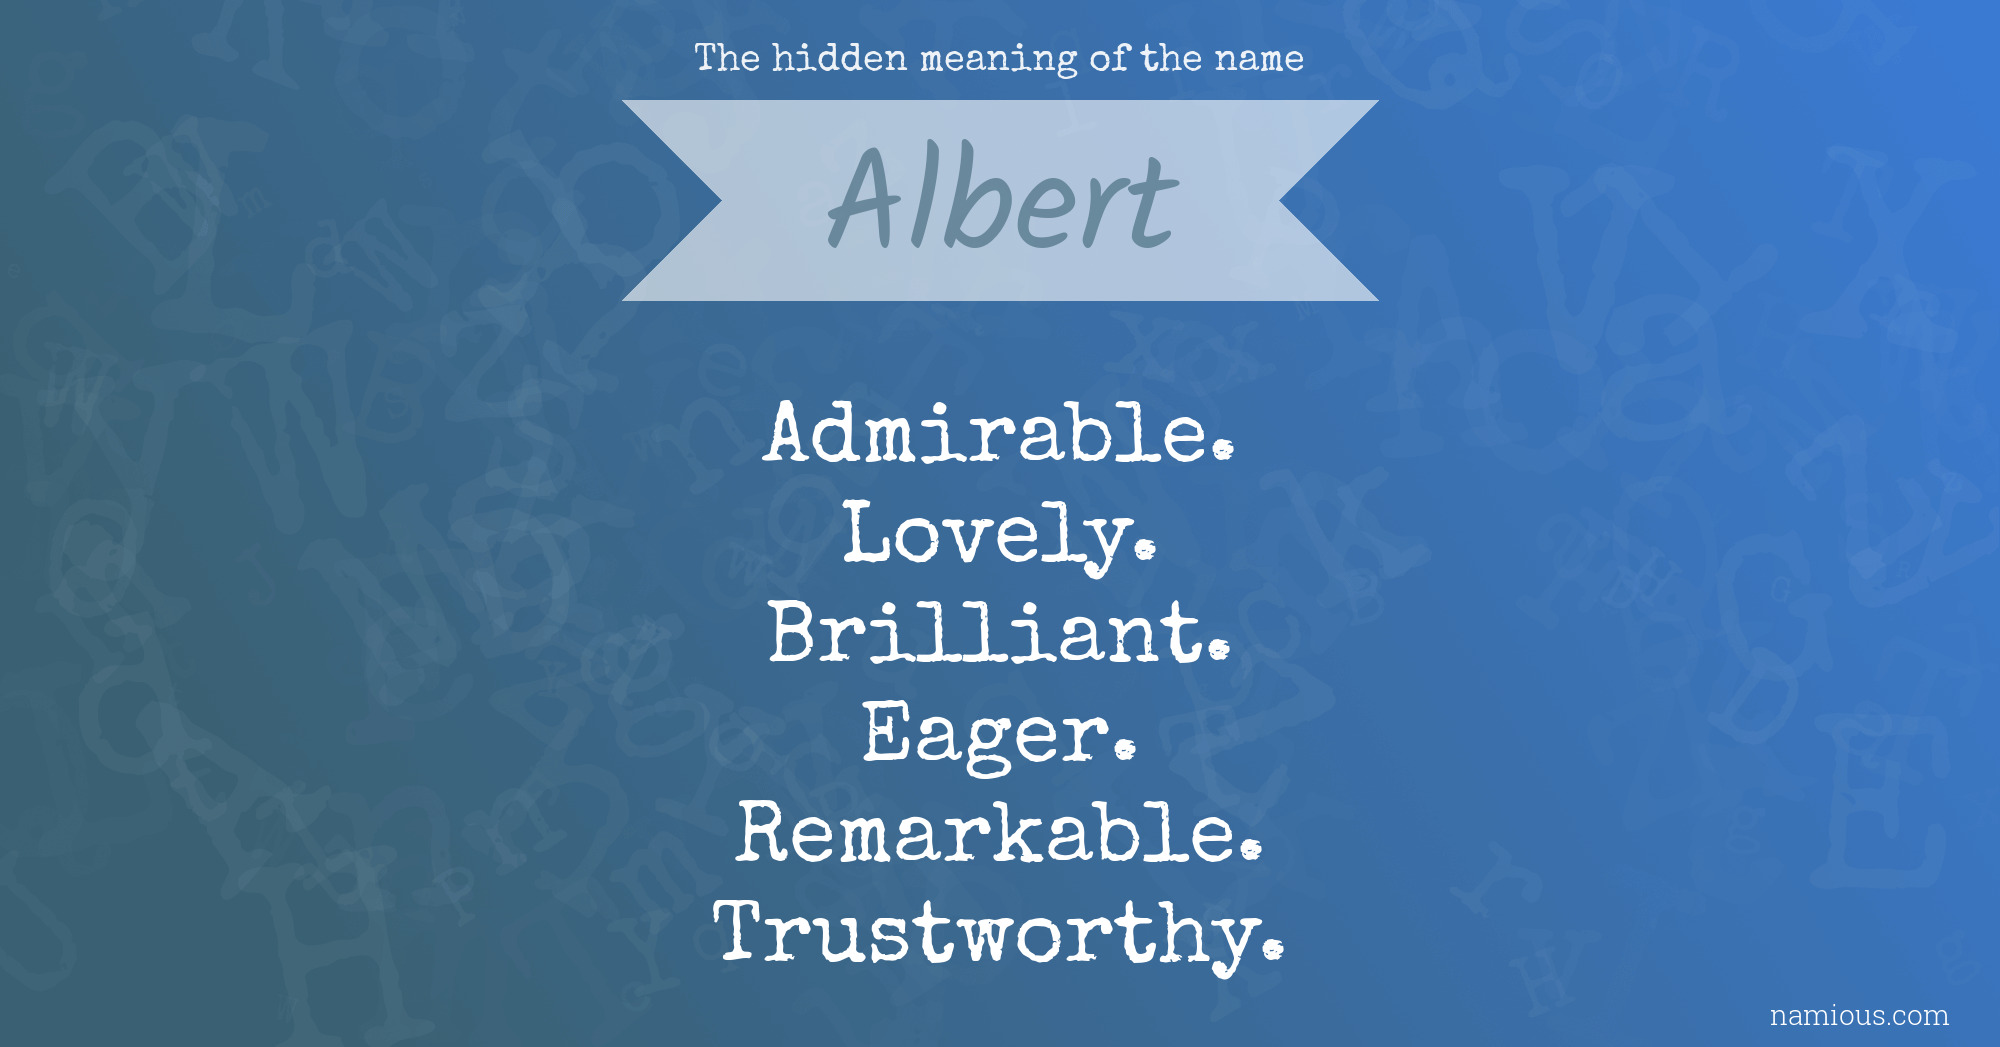 The hidden meaning of the name Albert